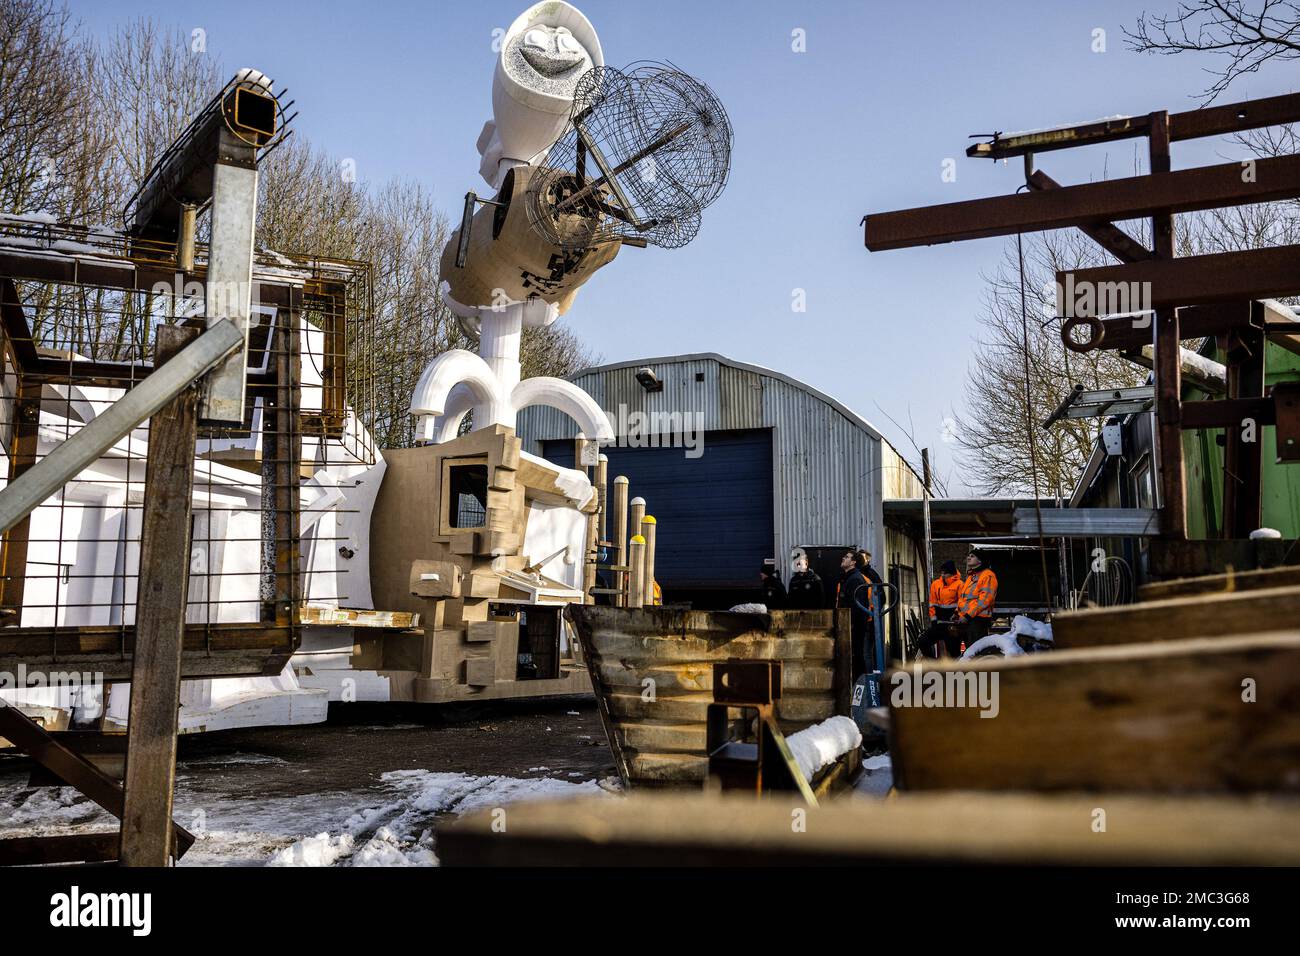 OIRSCHOT - Members of a carnival association practice assembling a float. Carnival is celebrated in the south of the country in February. ANP ROB ENGELAAR netherlands out - belgium out Credit: ANP/Alamy Live News Stock Photo